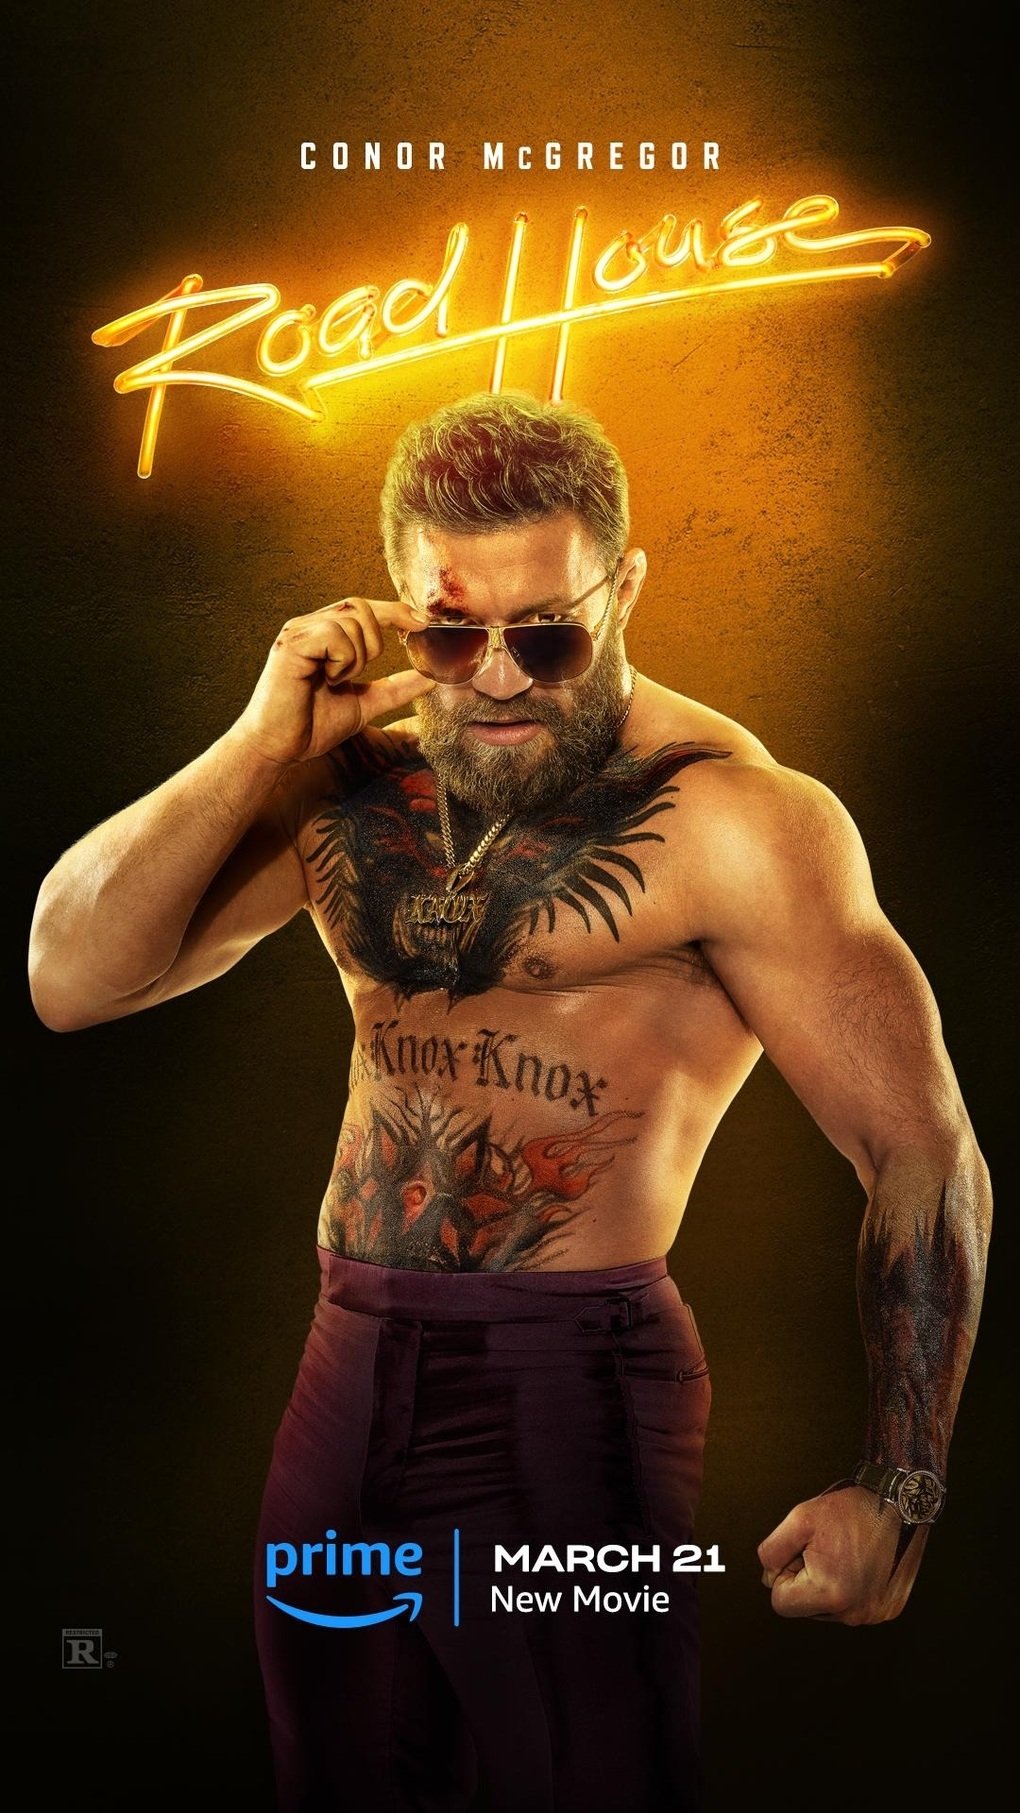 The first time acting received 5.5 million USD, boxer Conor McGregor set a record 2